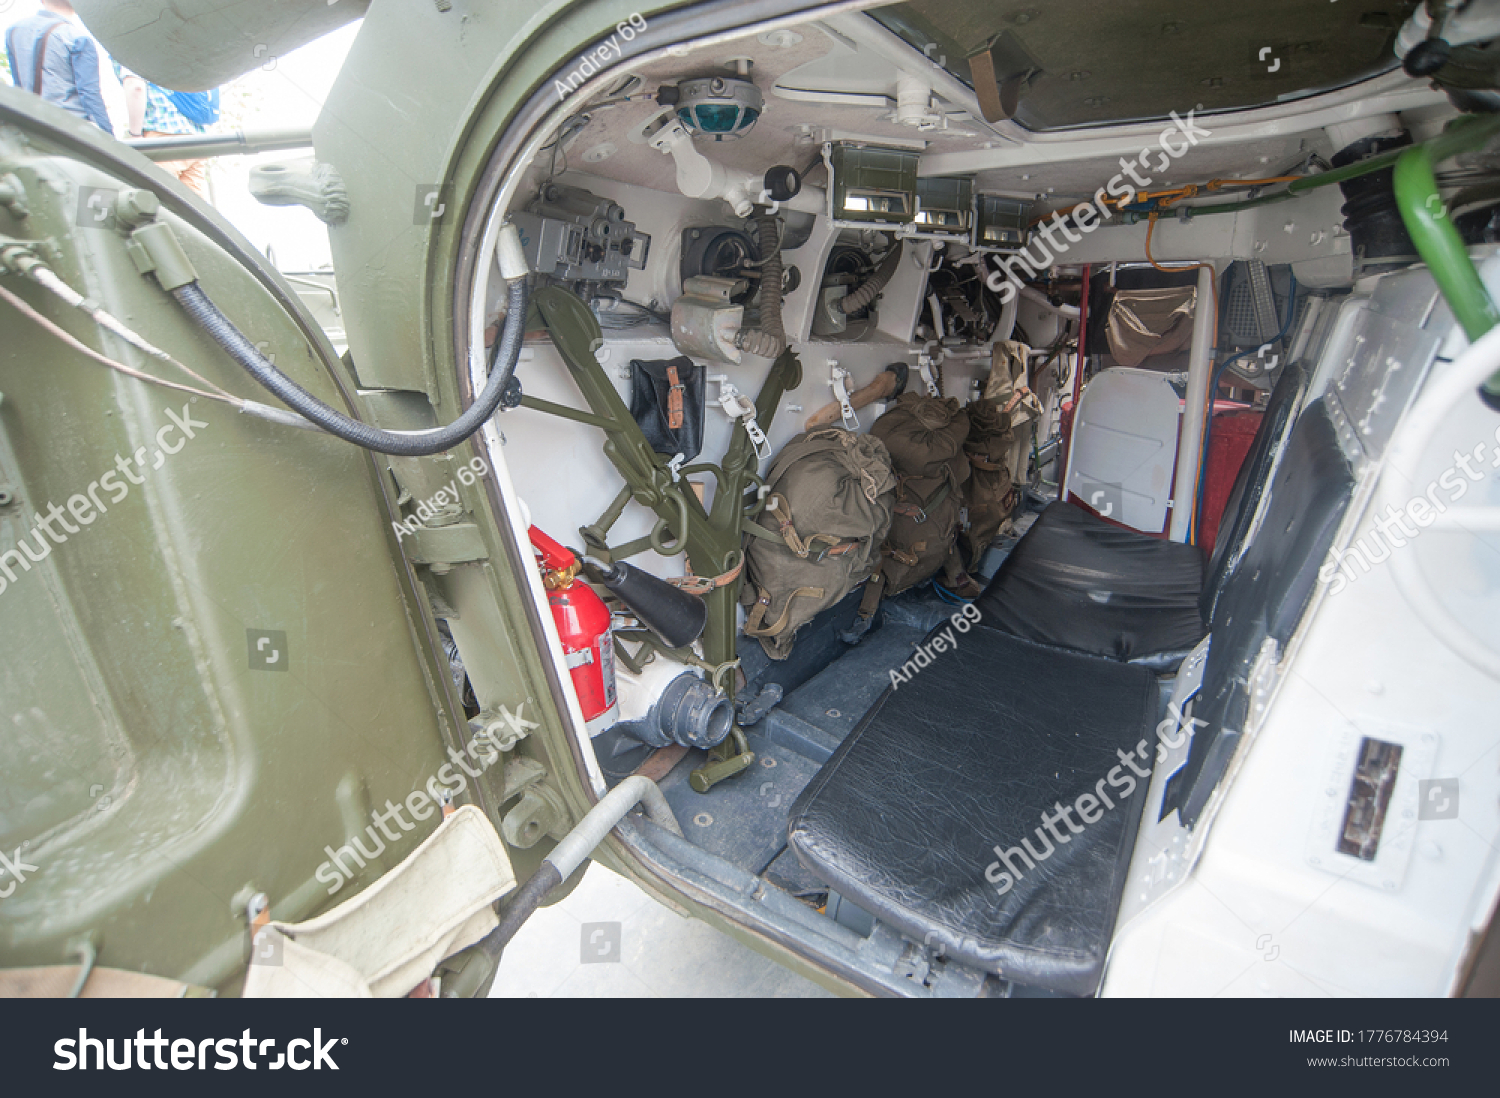 https://image.shutterstock.com/shutterstock/photos/1776784394/display_1500/stock-photo-alabino-moscow-region-russia-june-view-of-the-open-left-hatch-of-the-soviet-and-1776784394.jpg